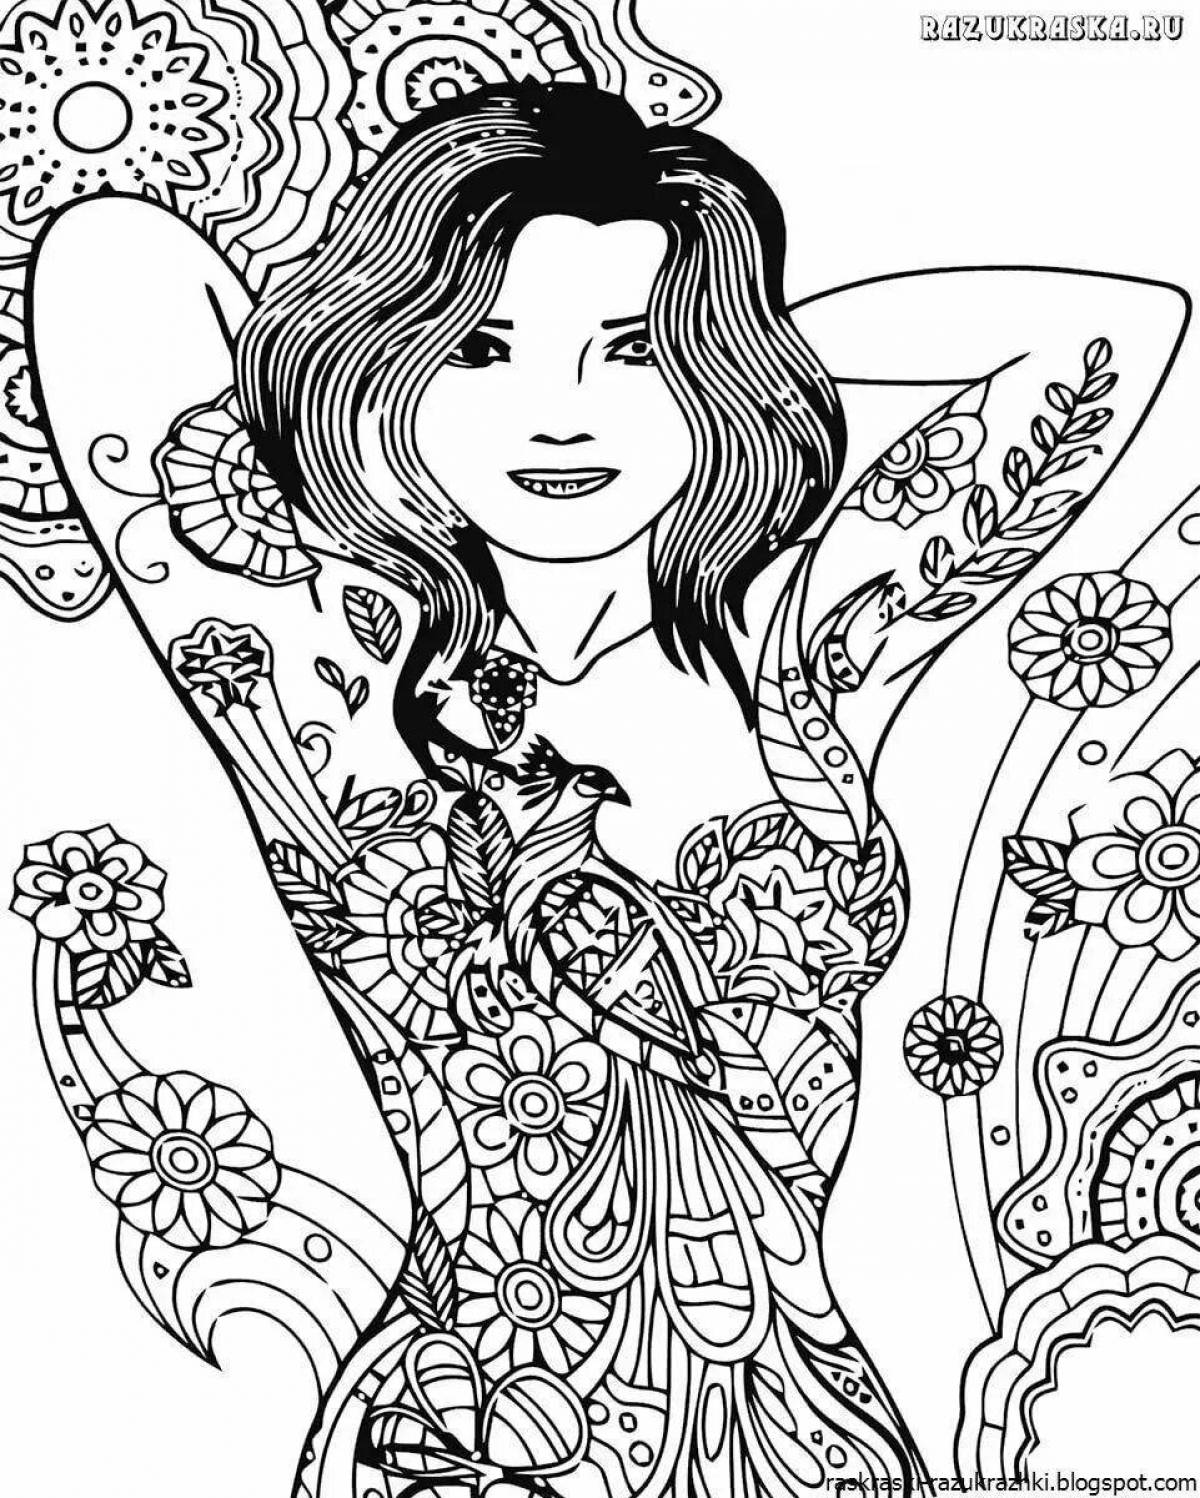 Inspiring coloring book for 14 year old girls